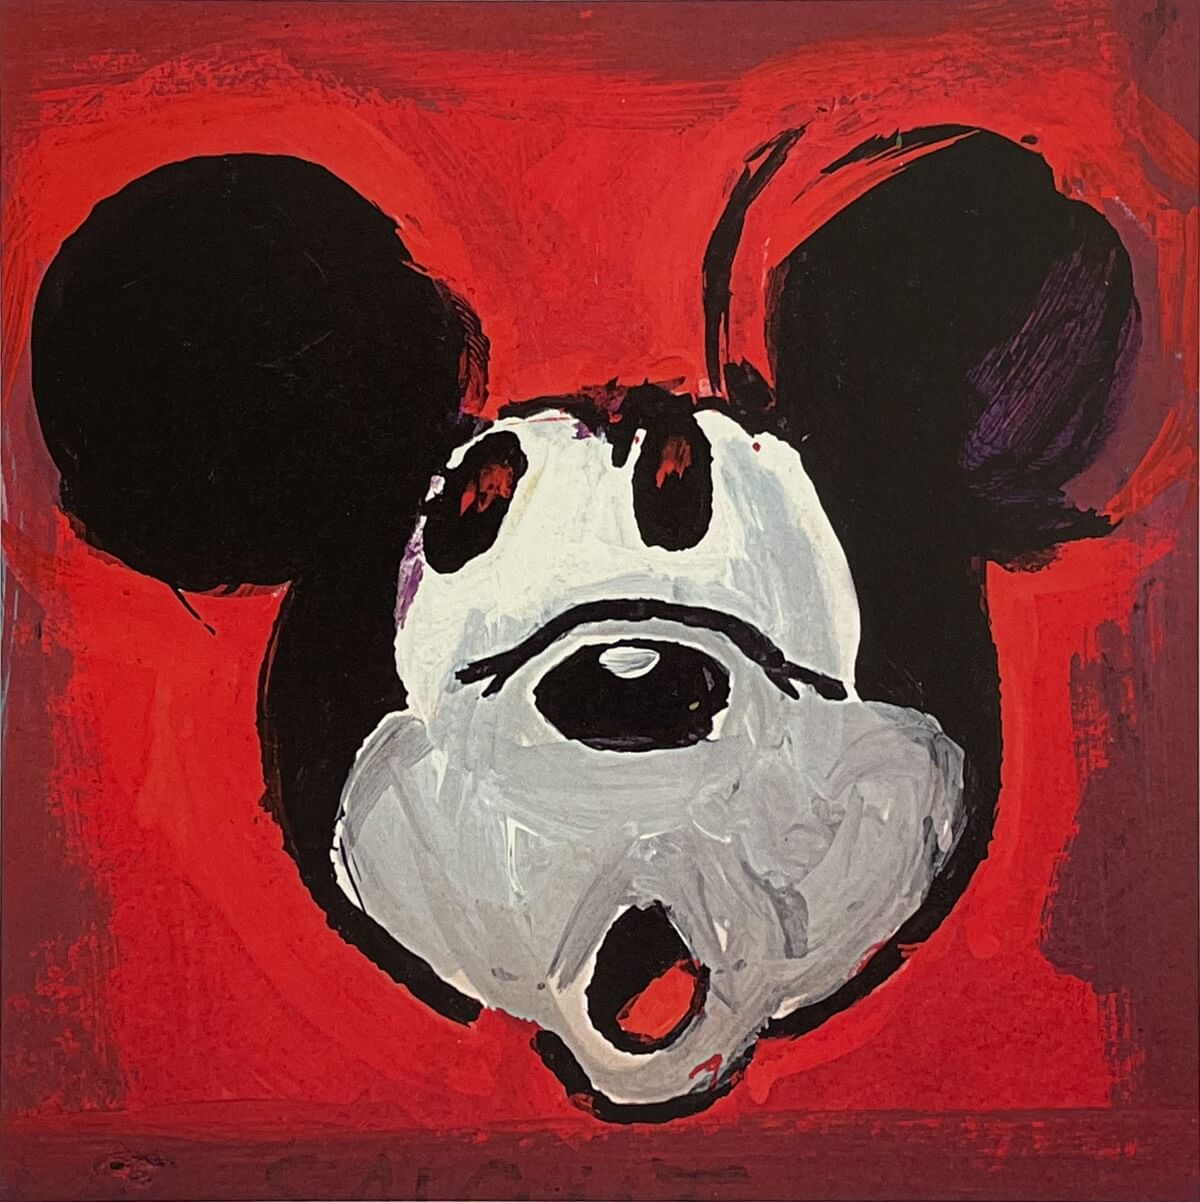 Mickey on the beach Painting by LOIC ZGS